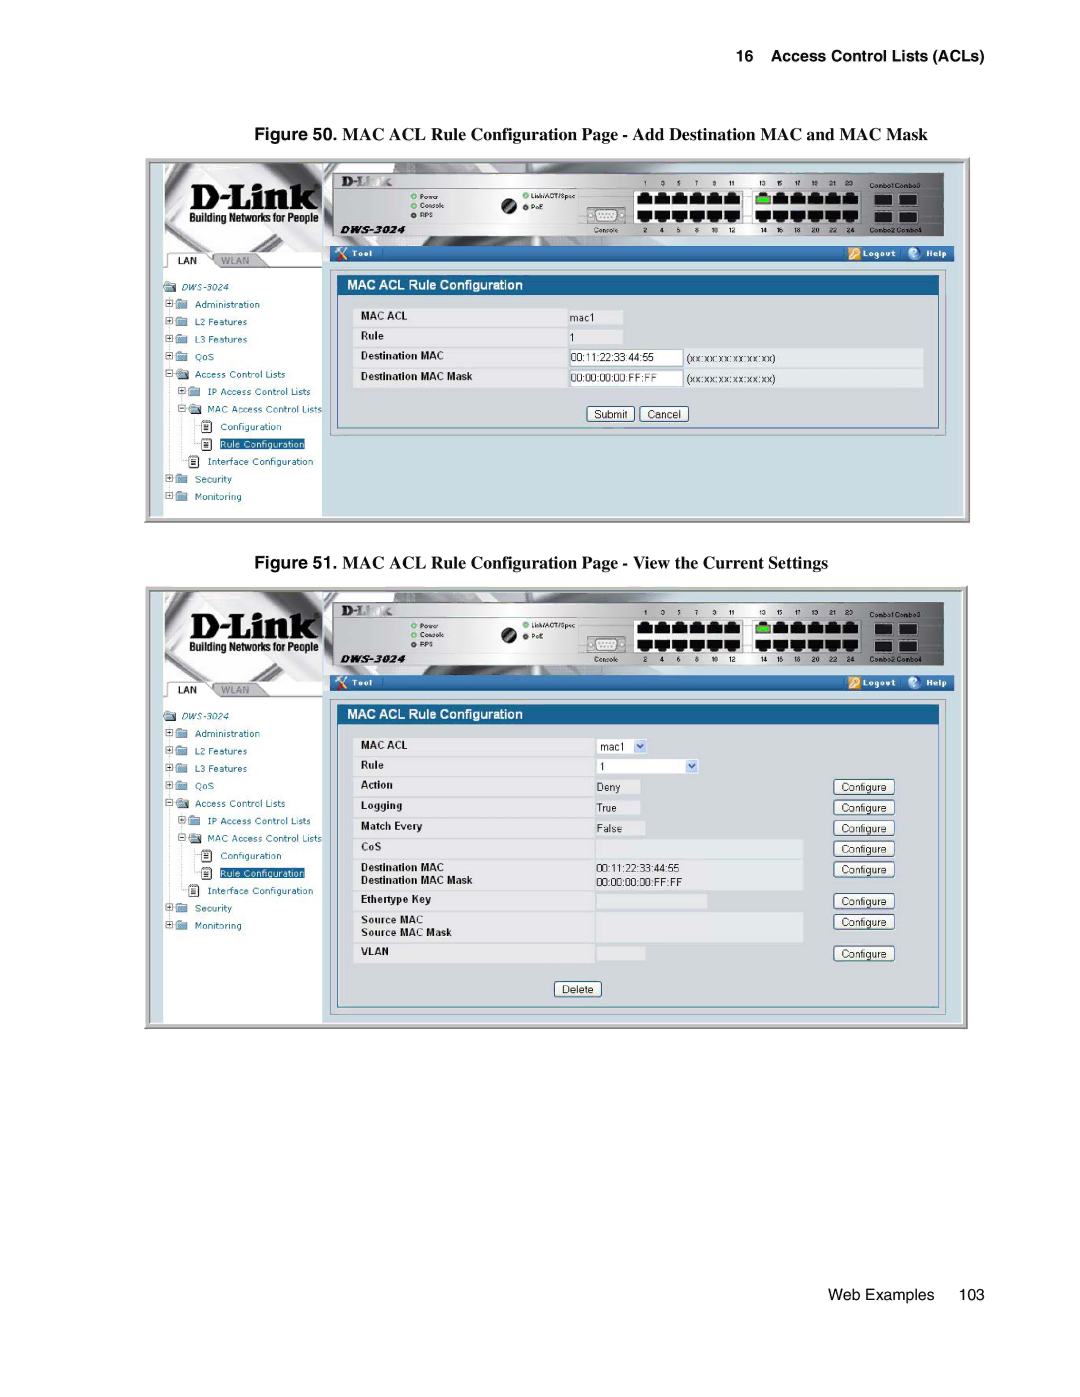 D-Link DWS-3000 manual MAC ACL Rule Configuration Page View the Current Settings 